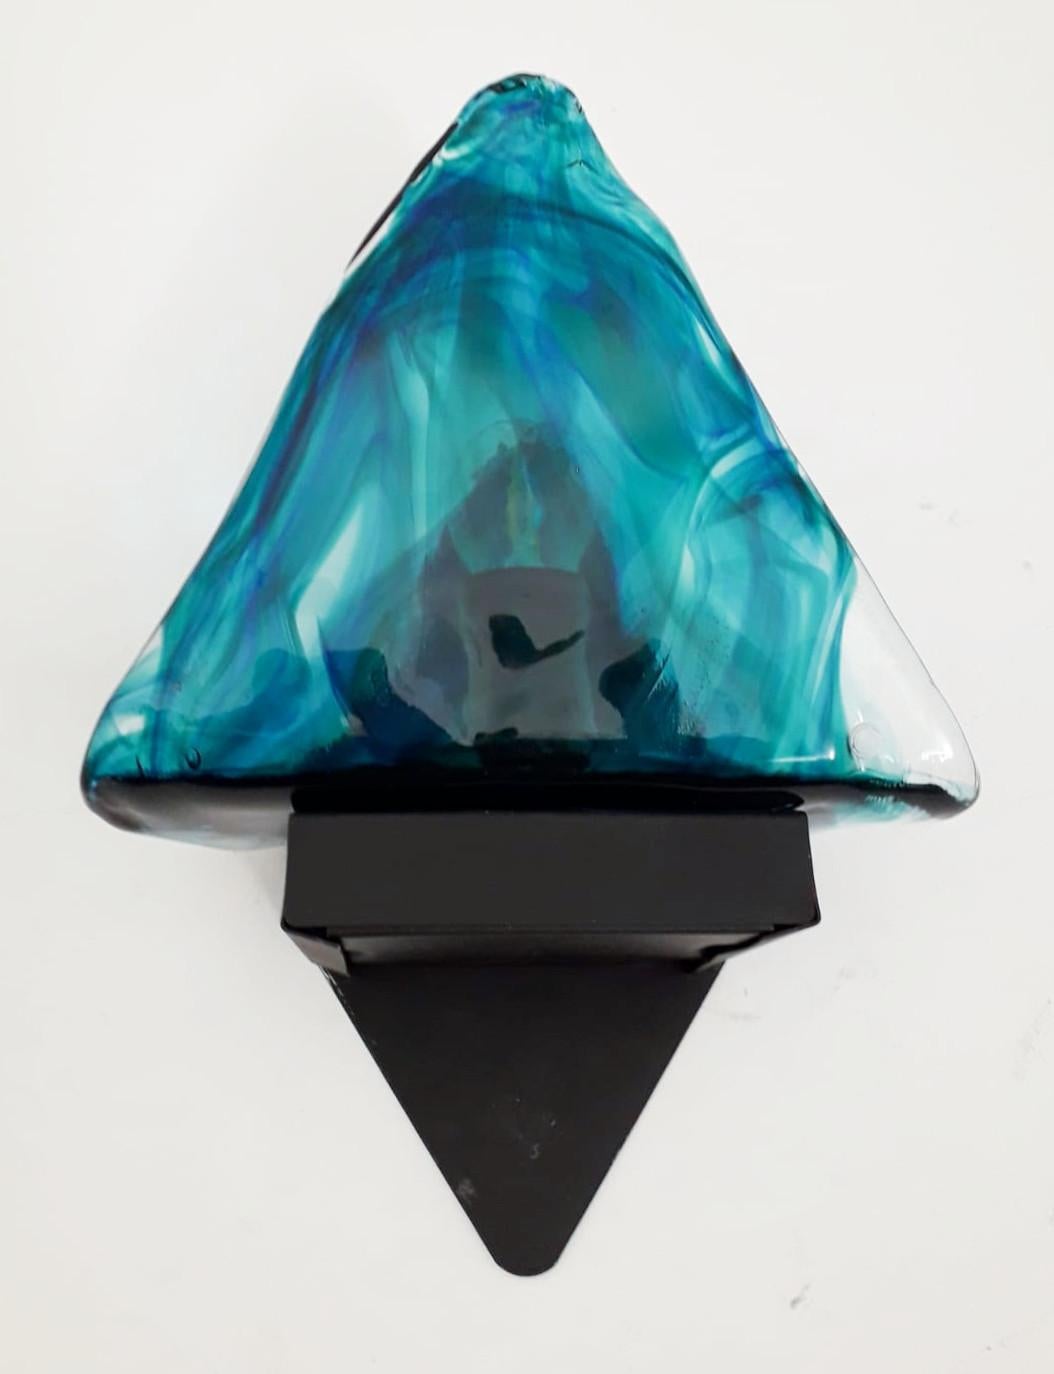 Rare unusual vintage Italian wall lights with blue triangular hand blown Murano glass shades mounted on black triangular frames, designed by La Murrina / made in Italy circa 1970s
